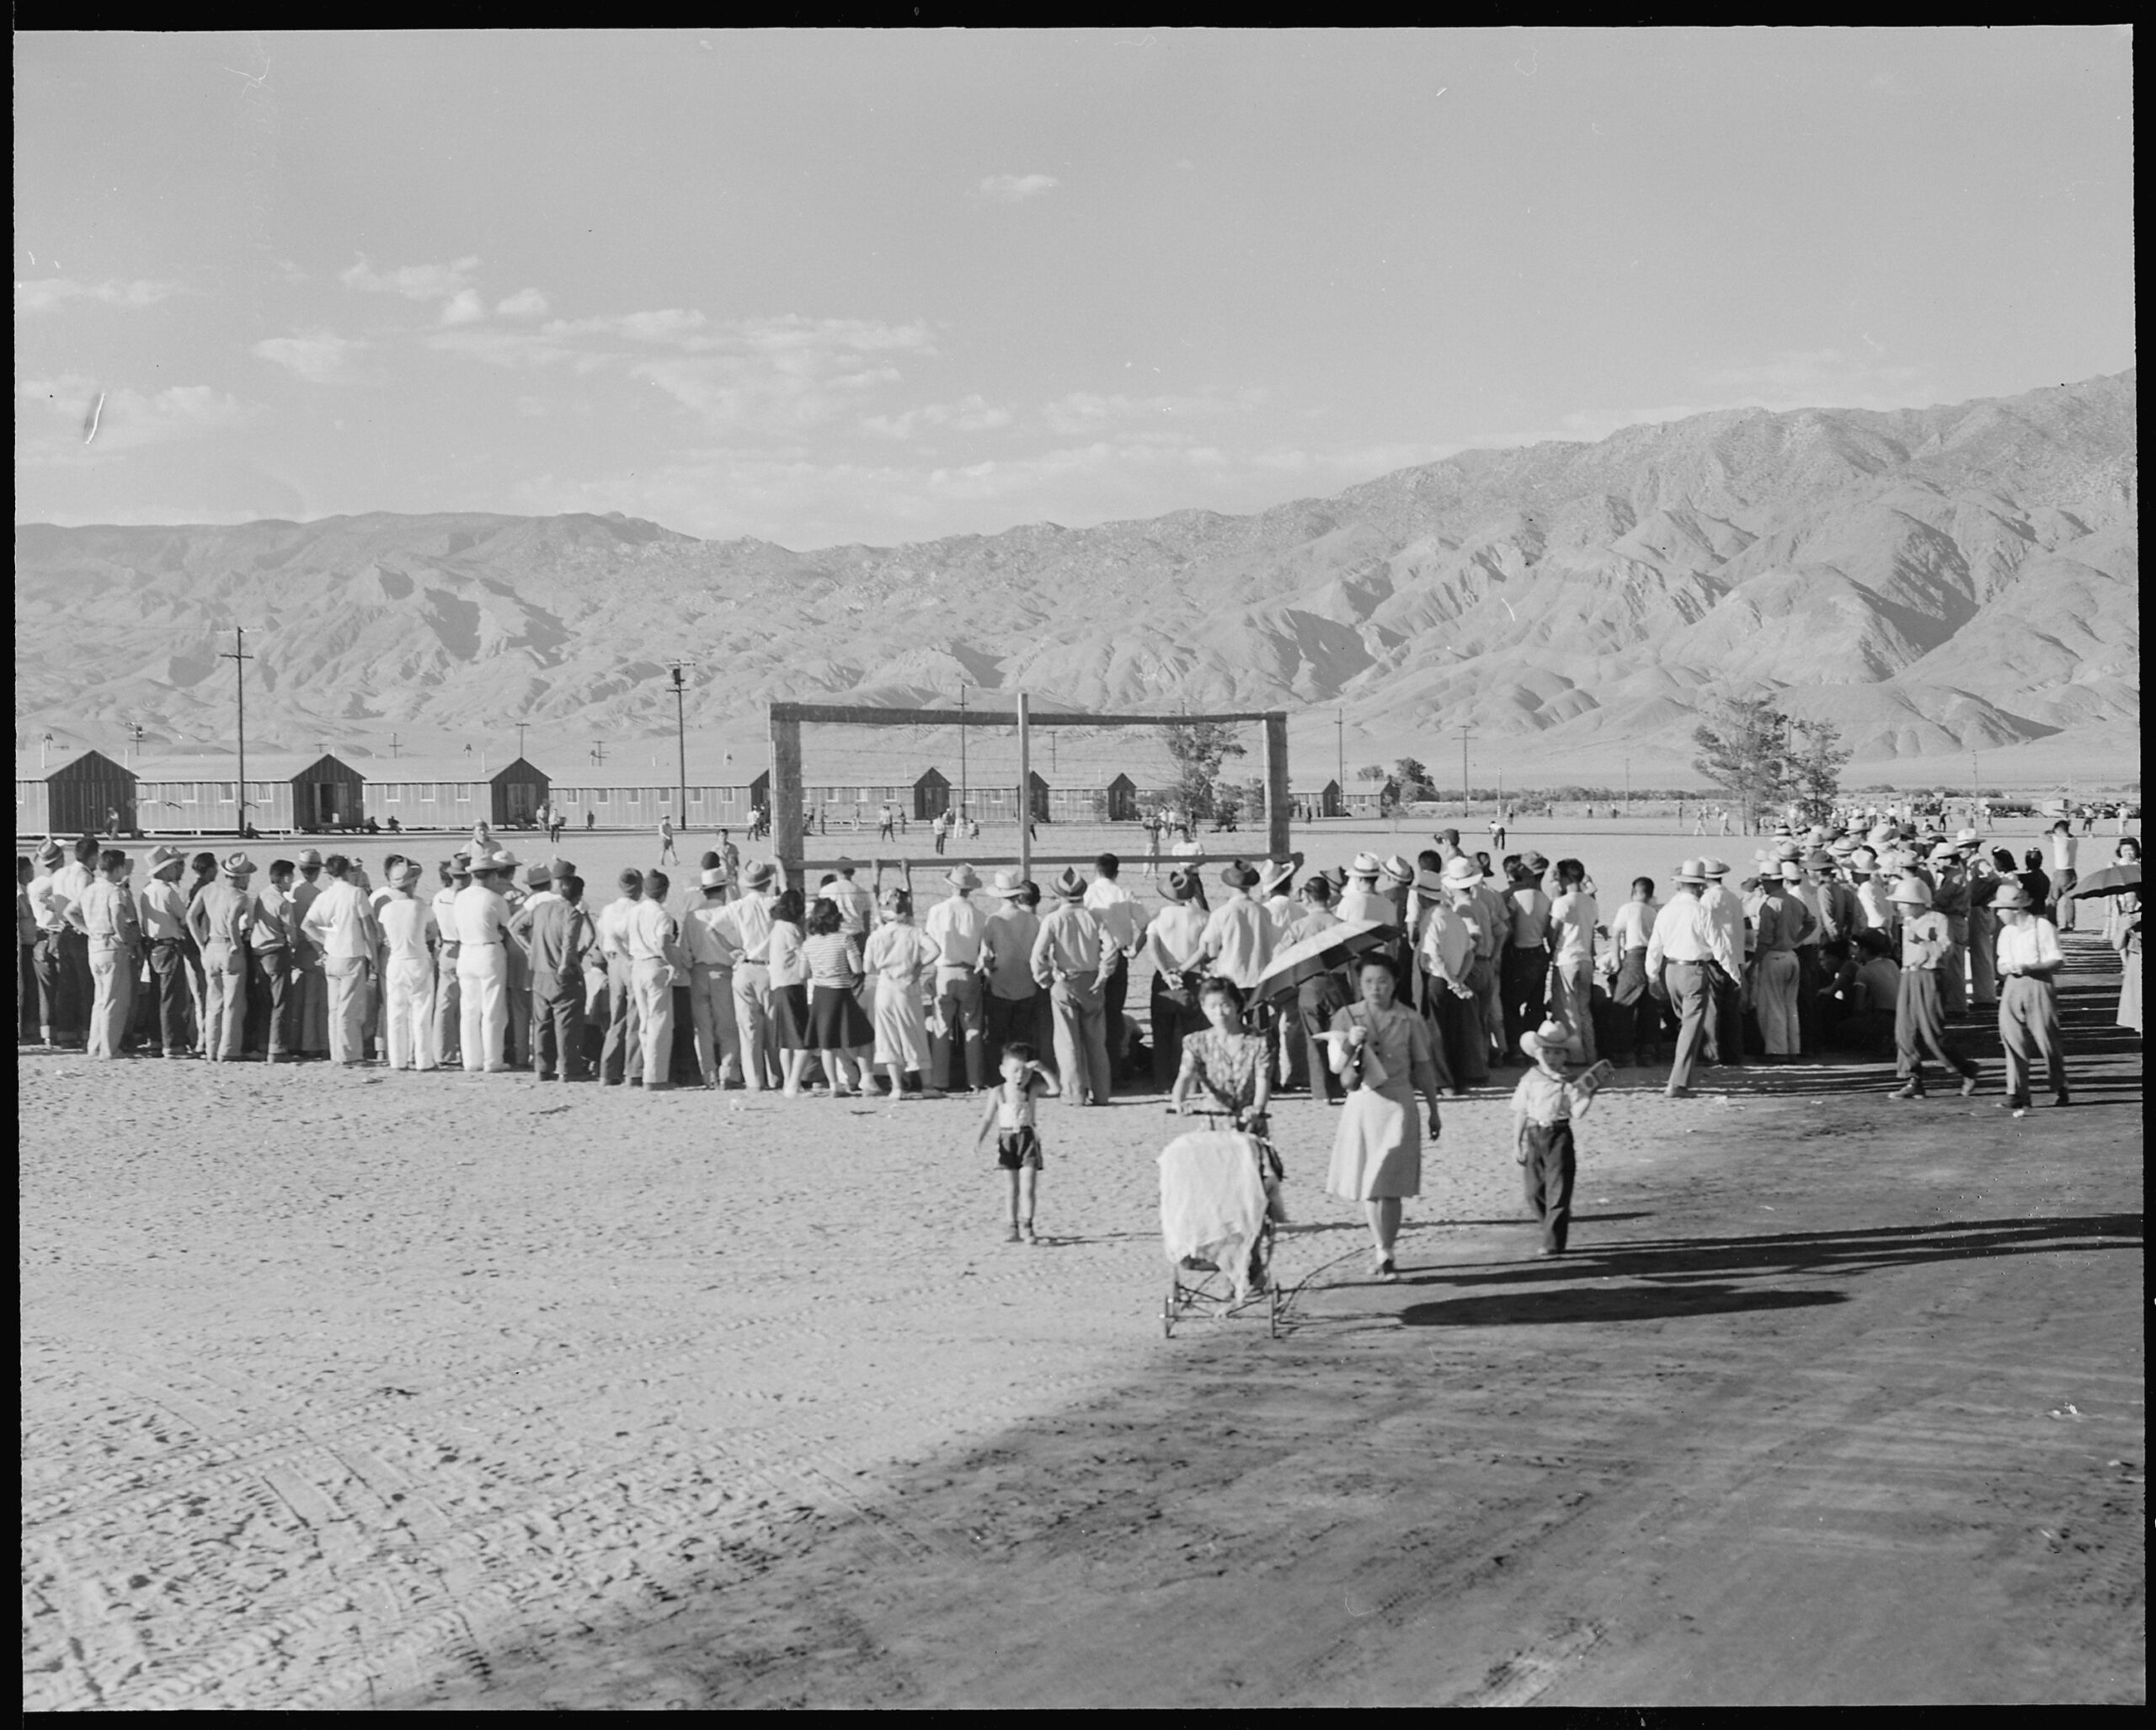 Evacuees watch their league’s baseball game at Manzanar Relocation Center